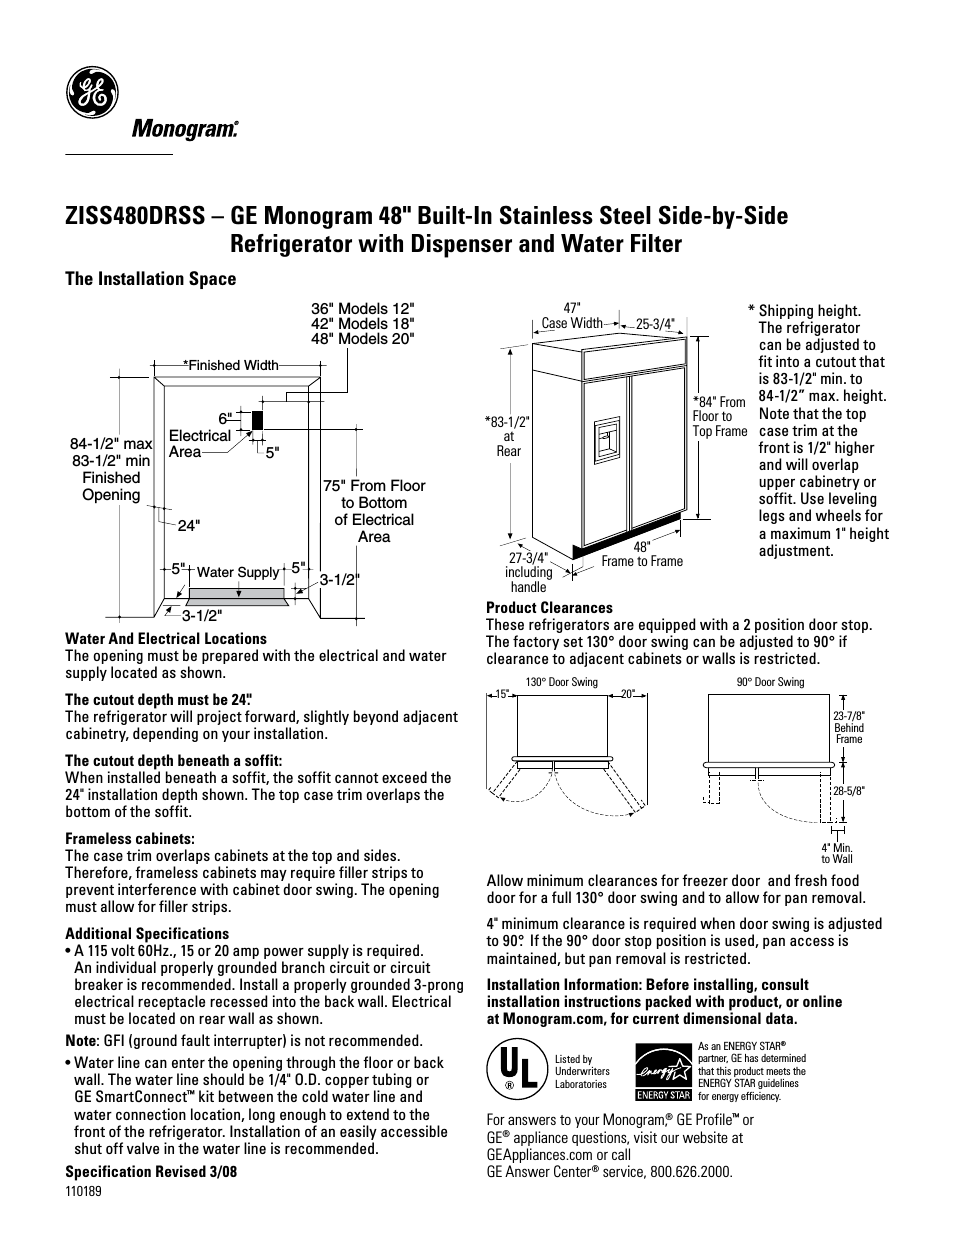 ZISS480DRSS (Page 1)